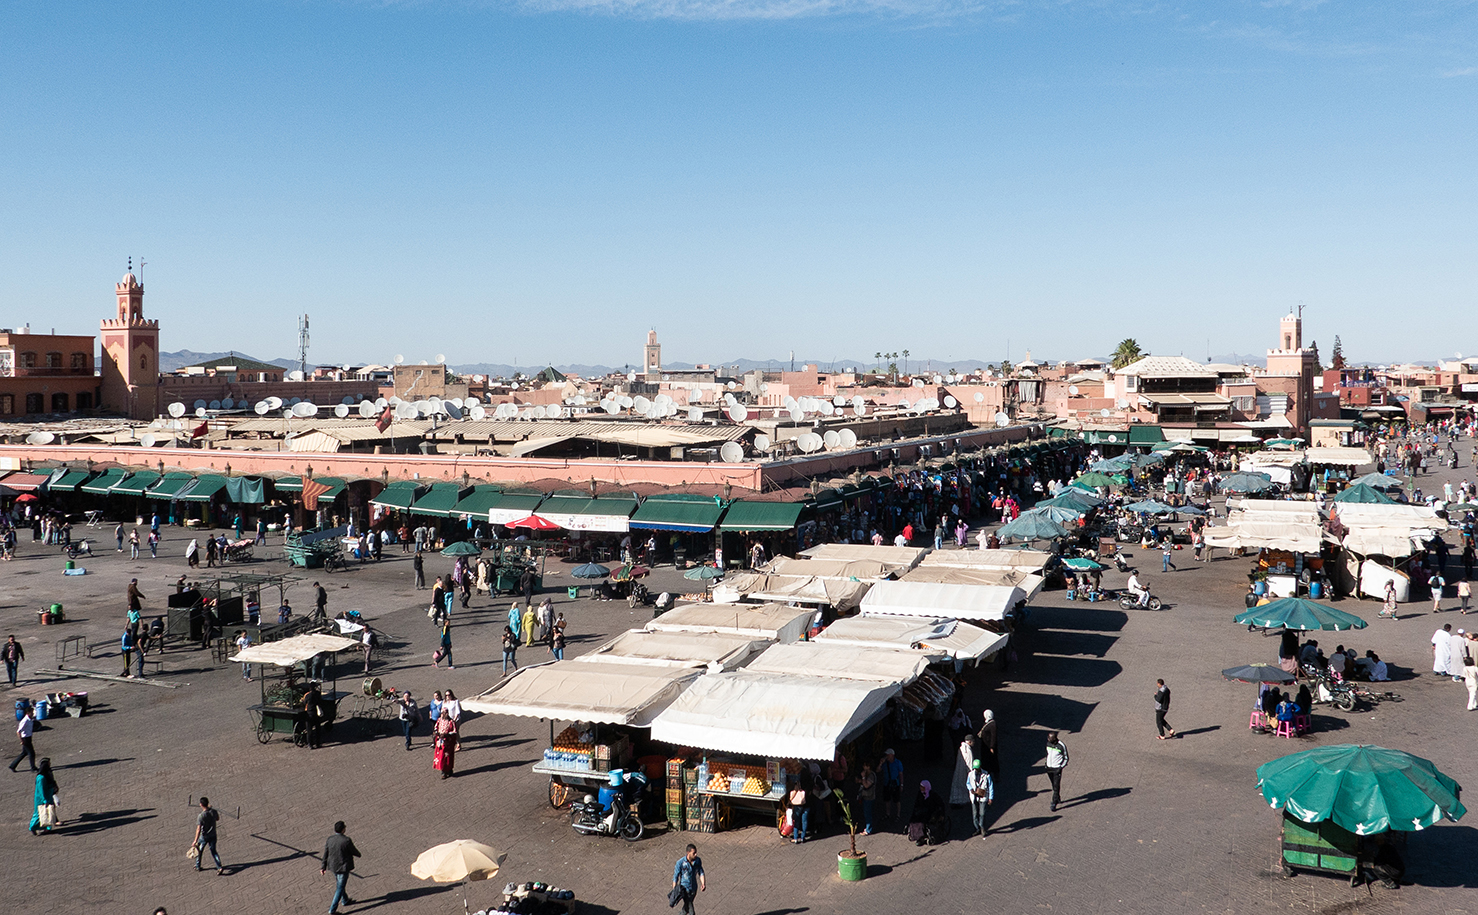 Marrakesh | A city of alluring contrasts